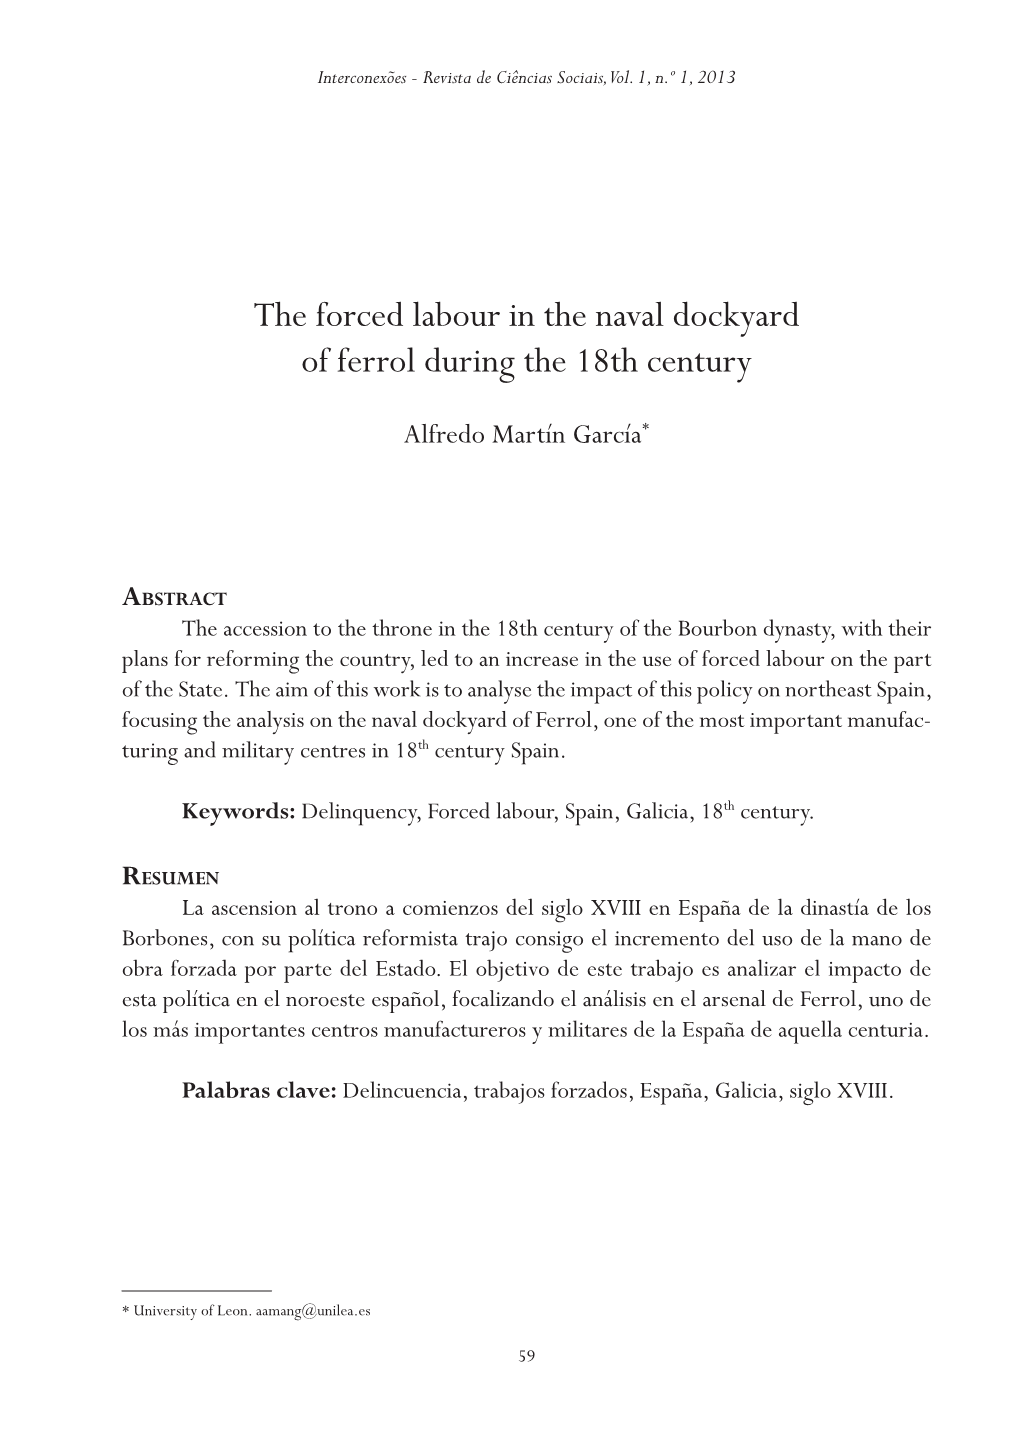 The Forced Labour in the Naval Dockyard of Ferrol During the 18Th Century